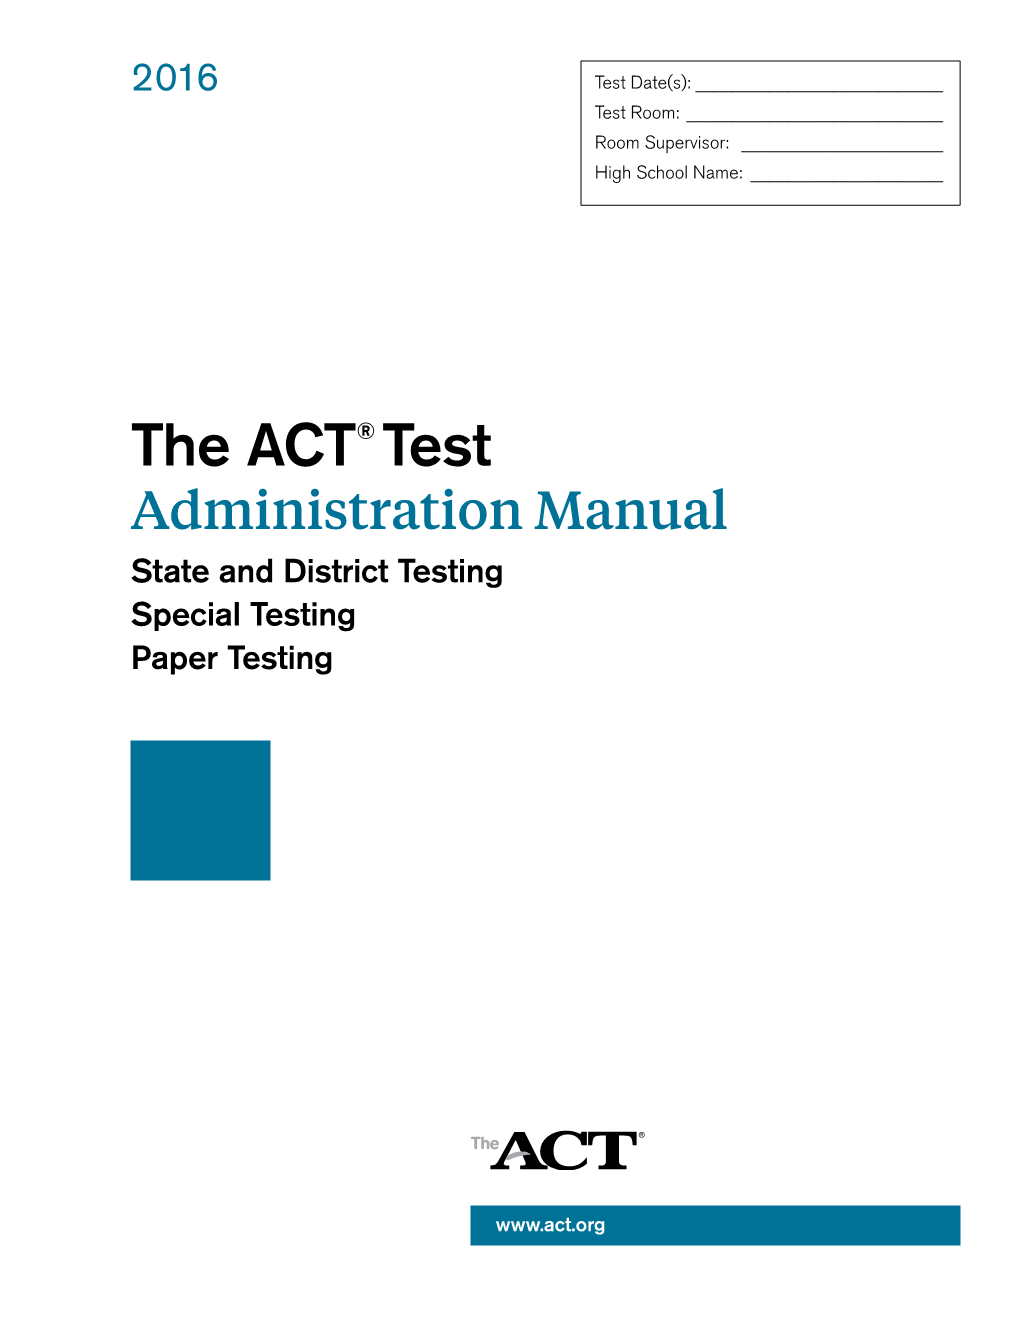 The ACT Test Administration Manual State and District Testing Special